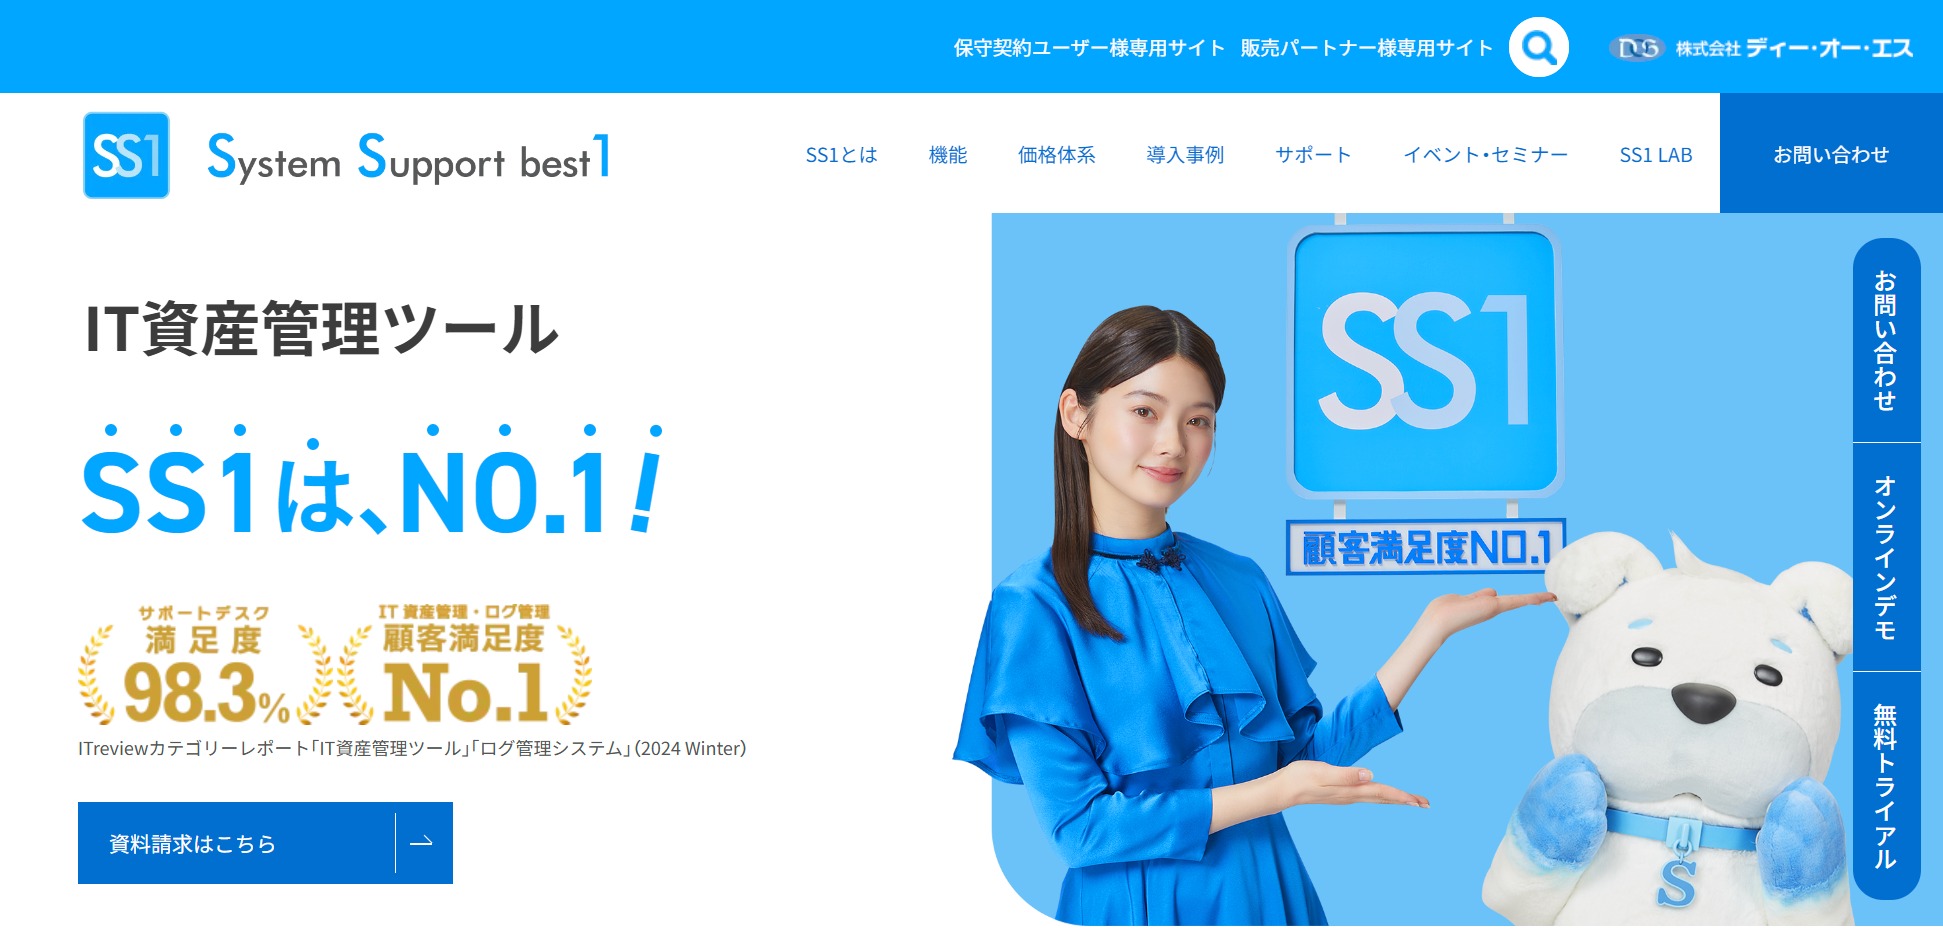 System Support best1公式Webサイト